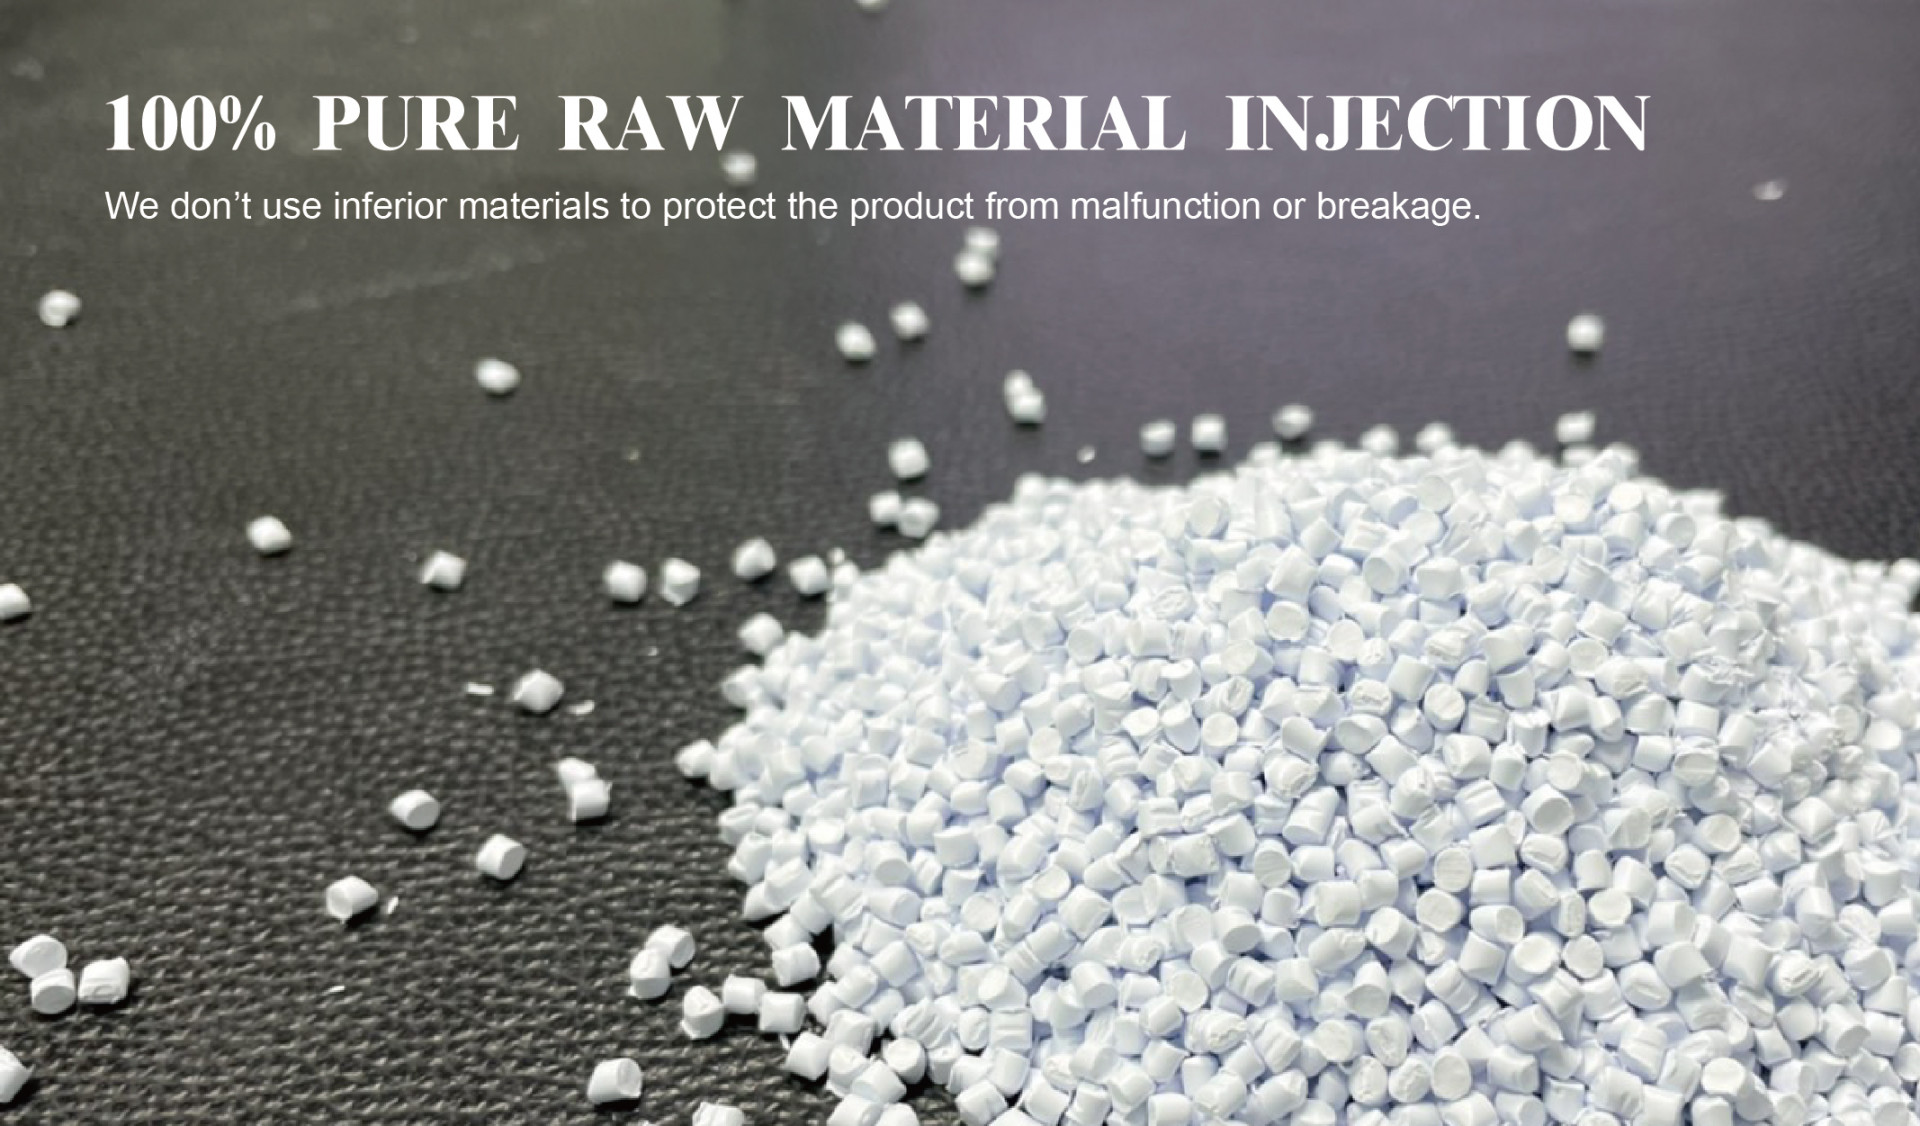 100% PURE RAW MATERIAL INJECTION